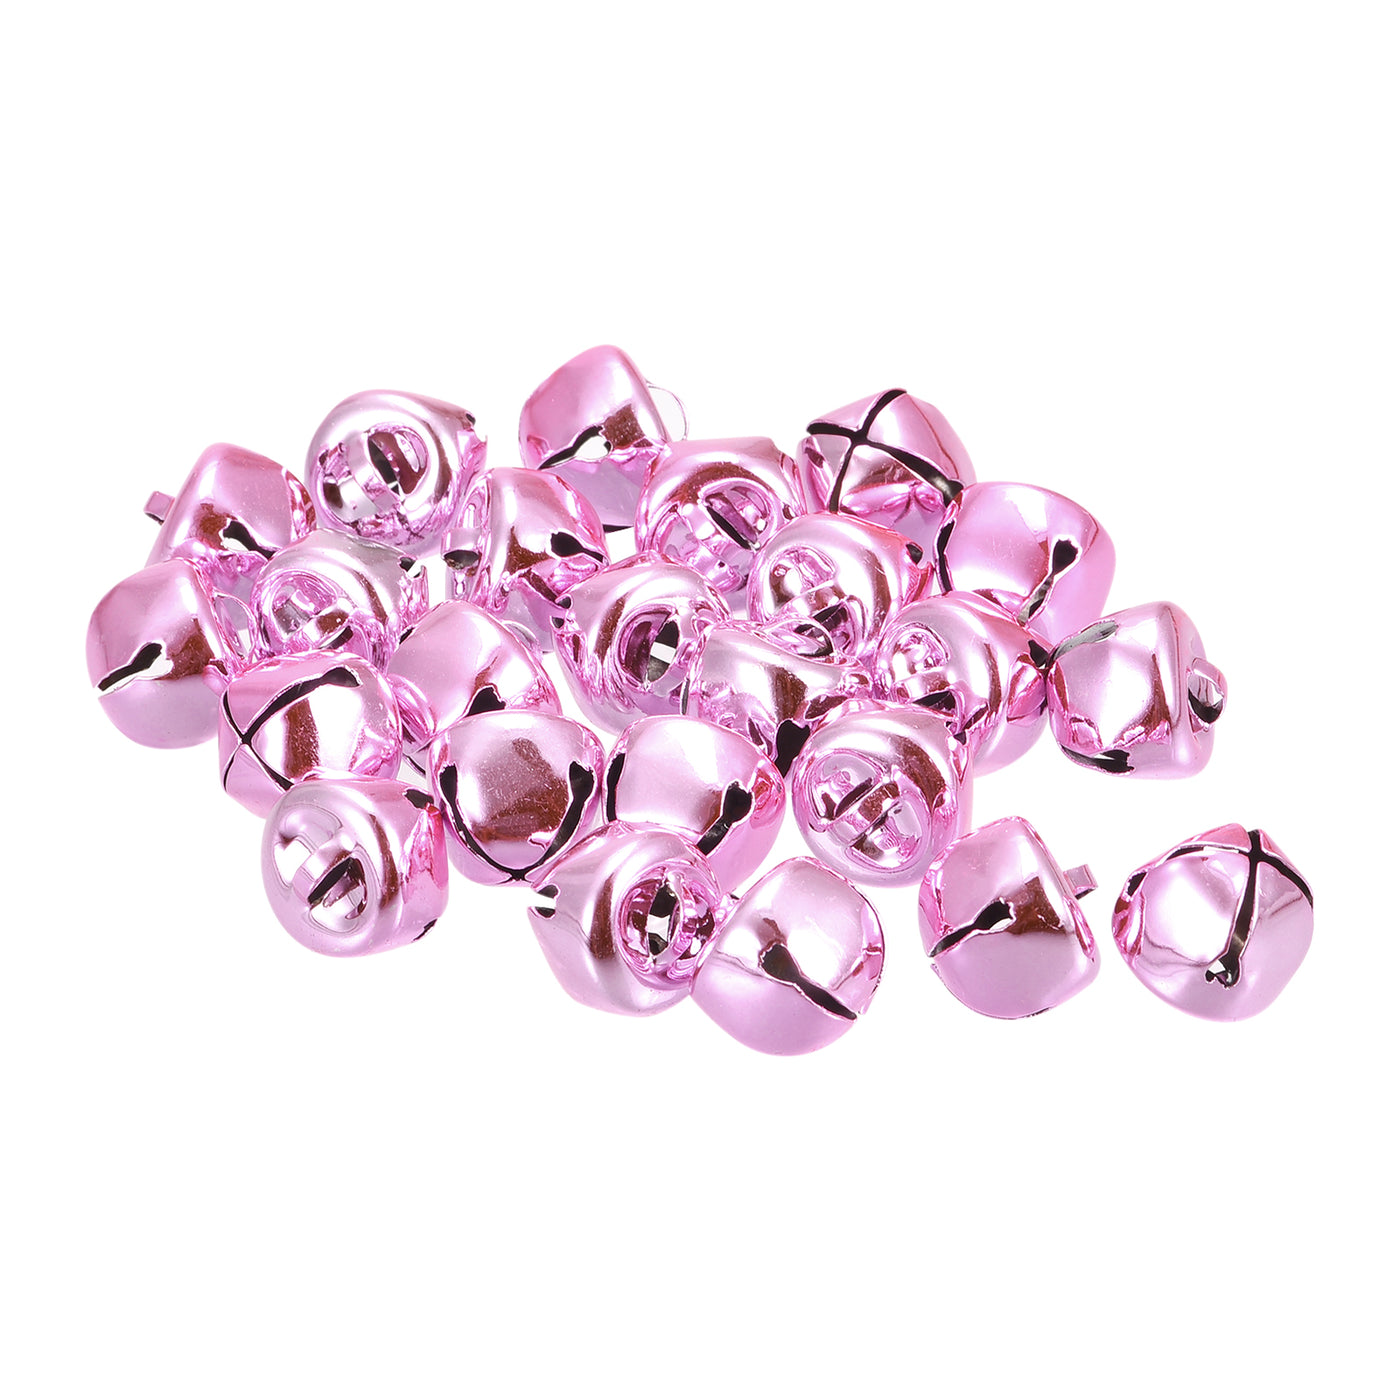 uxcell Uxcell Jingle Bells, 12mm 48pcs Small Bells for Crafts DIY Christmas, Pink